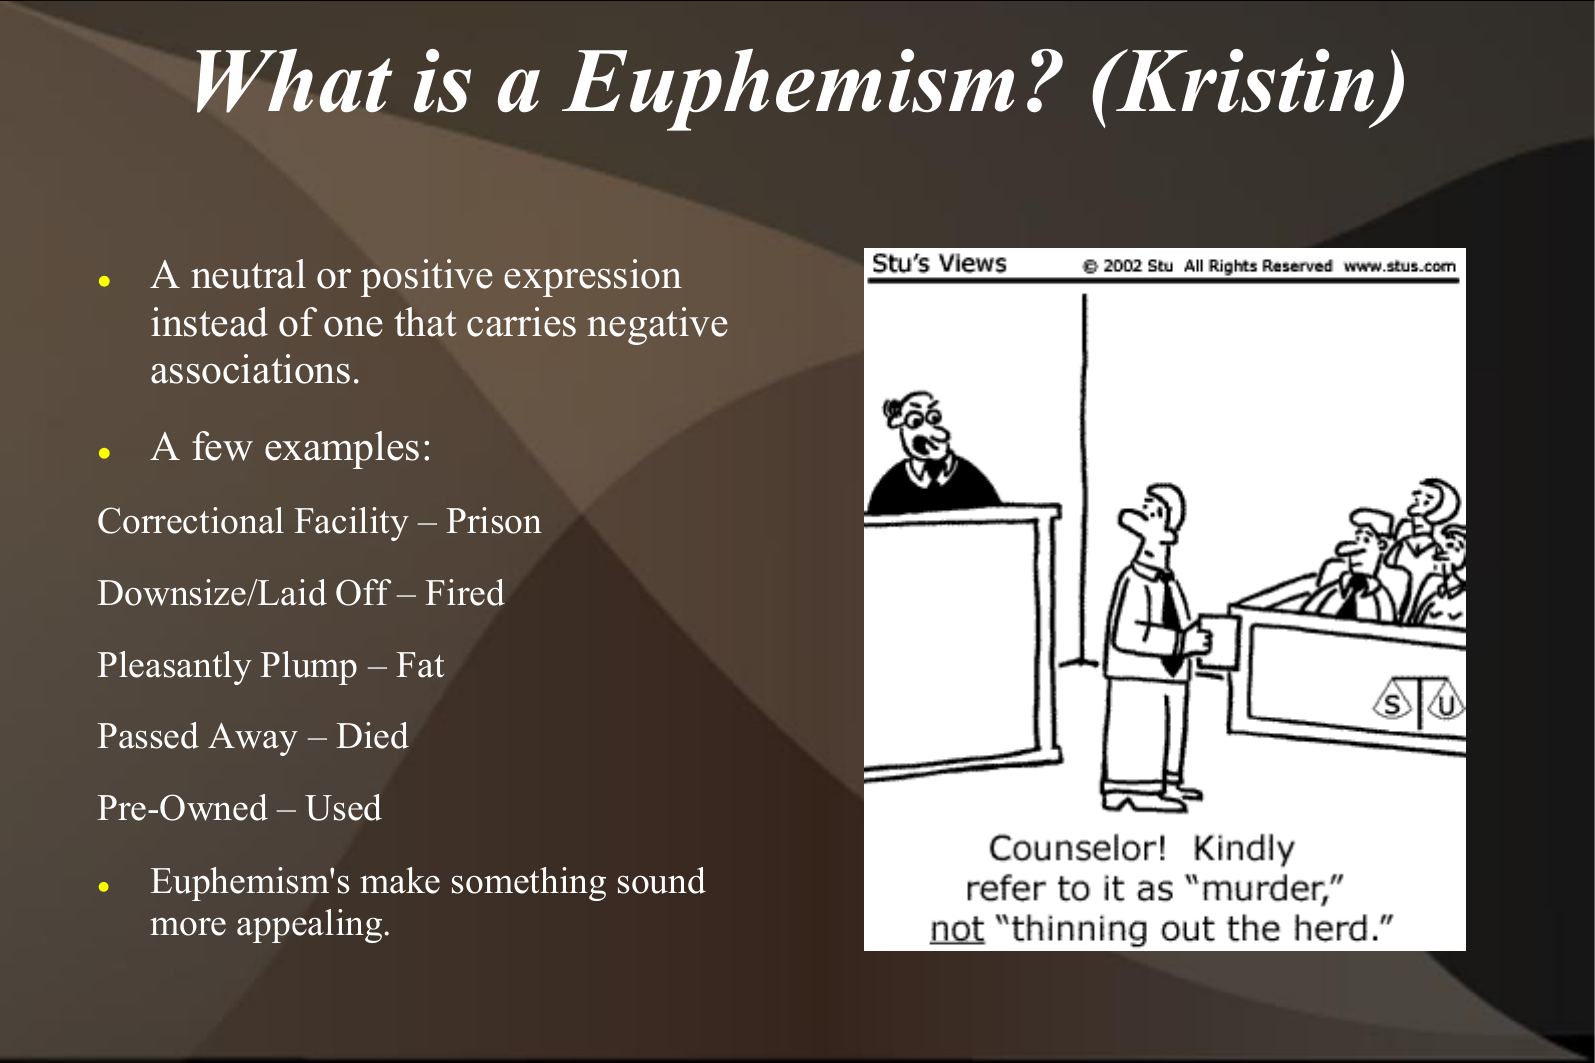 What is a Euphemism?